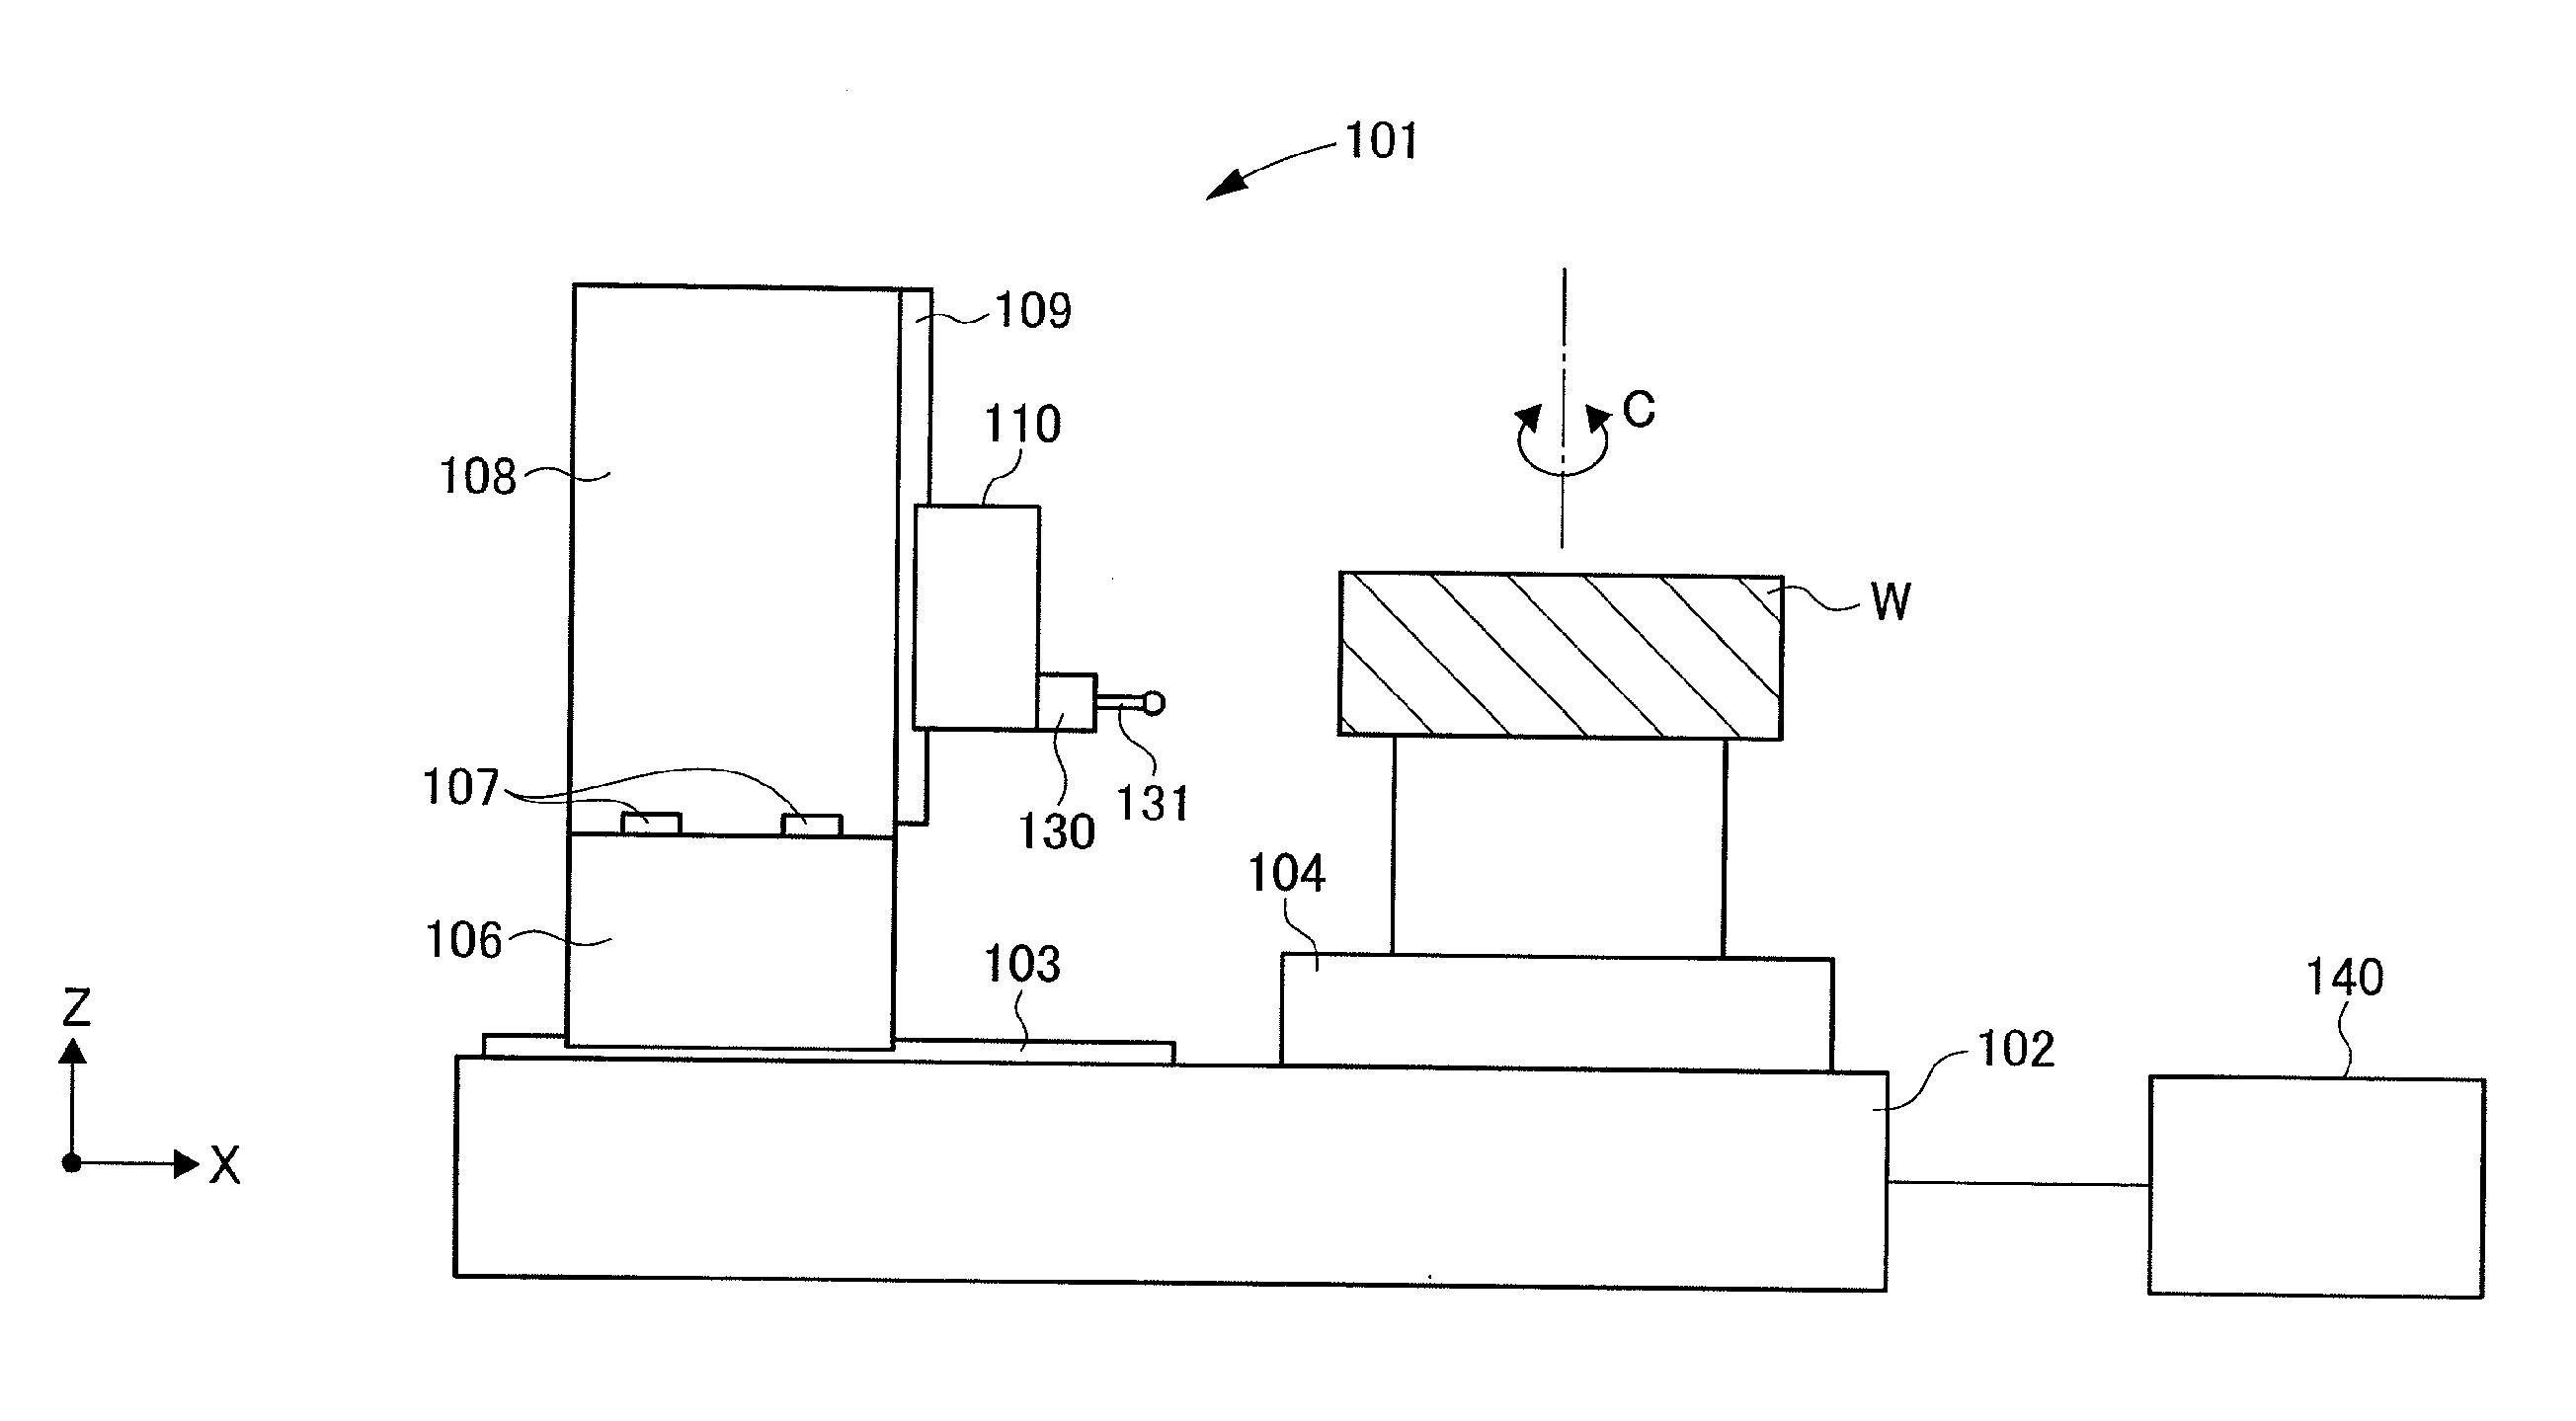 Method of calibrating gear measuring device